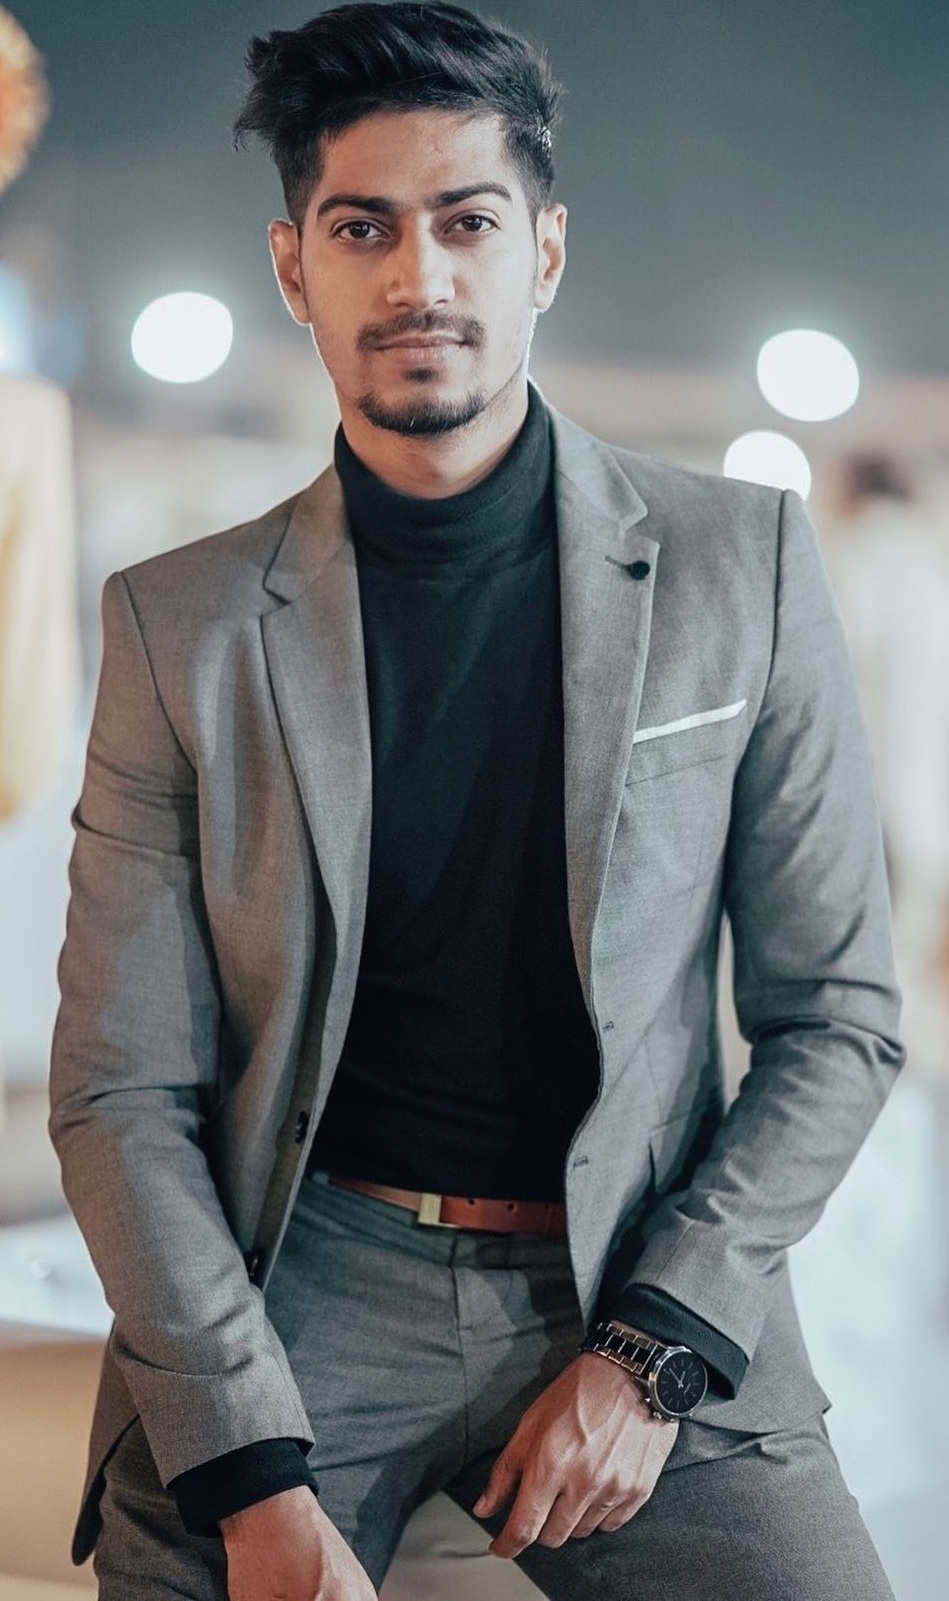 Modest Suit Looks for Men with Suit over a turtle neck tee